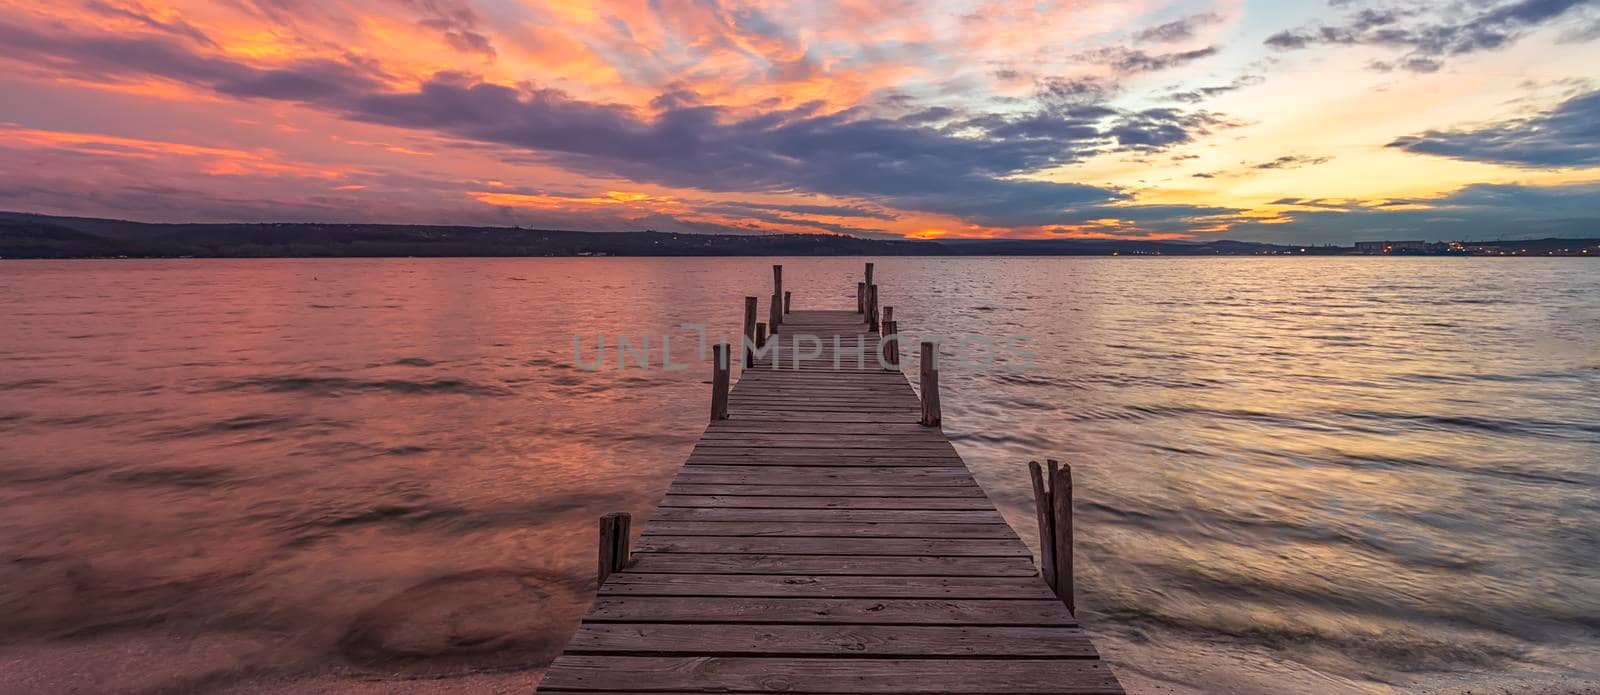 Banner of colorful sunset at a lake coast at a wooden pier. by EdVal